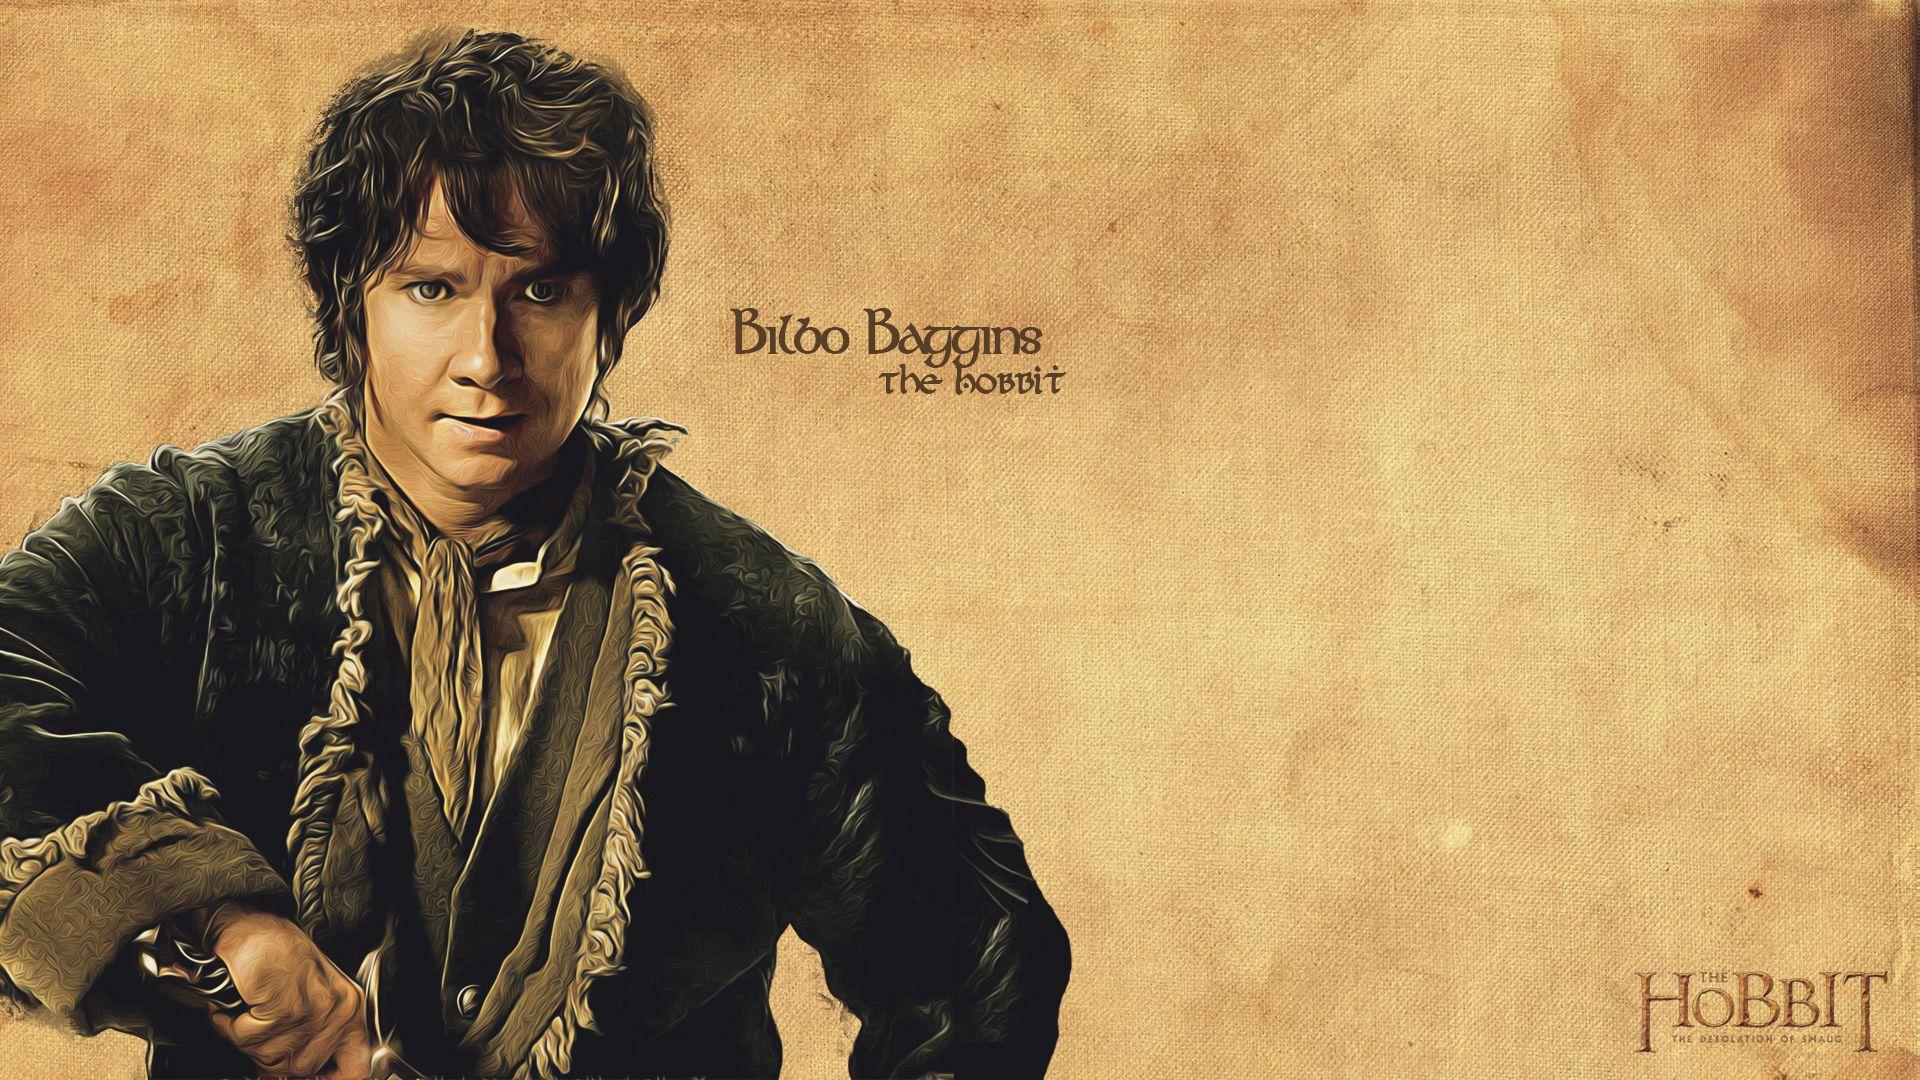 To all the Hobbit fans, we give you an exclusive wallpaper